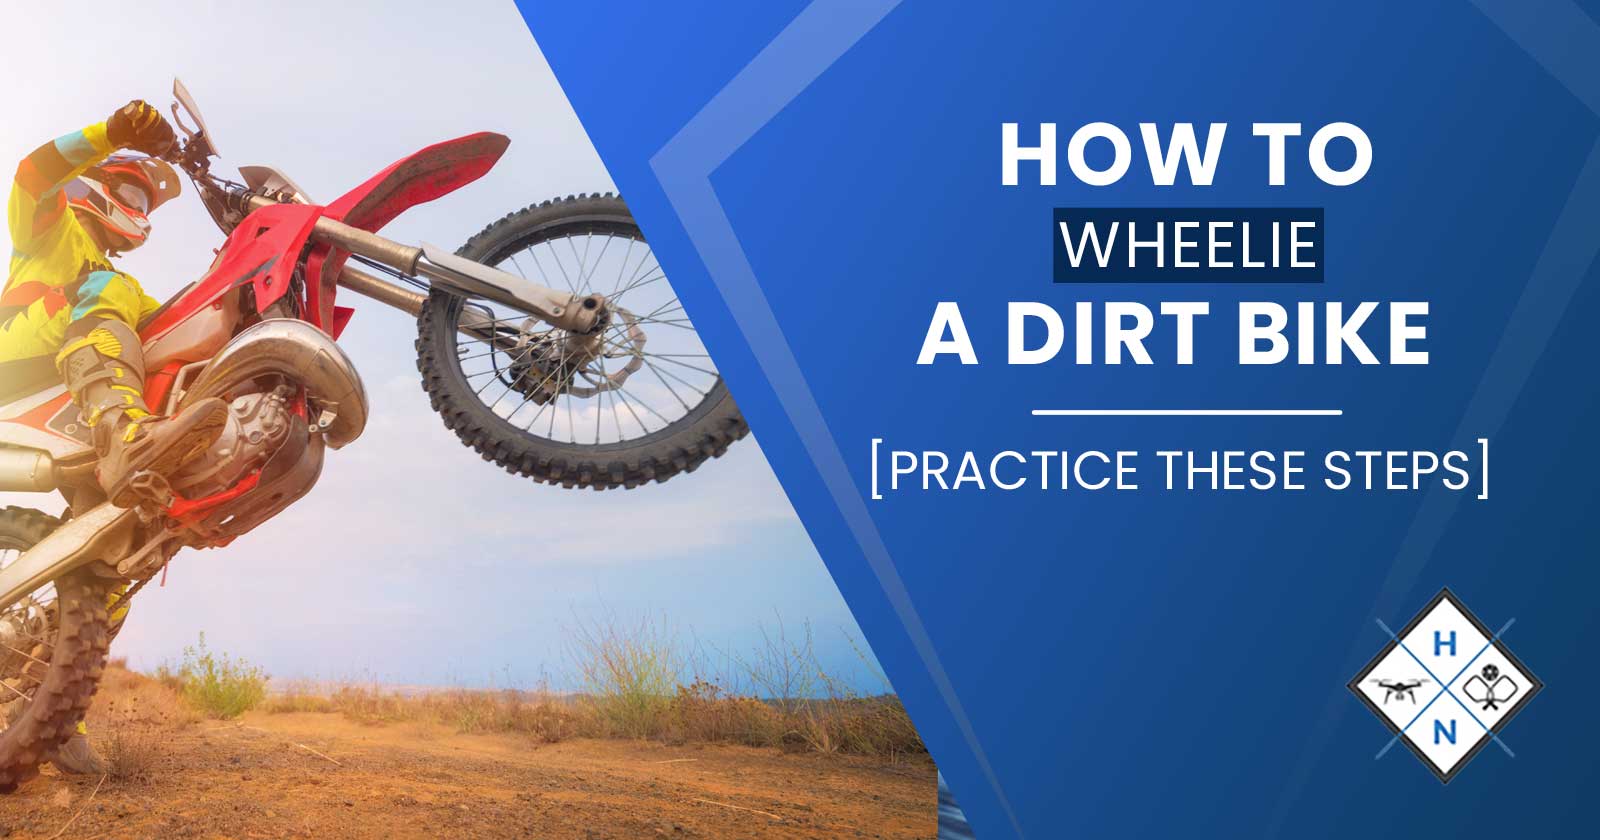 How to Wheelie a Dirt Bike [PRACTICE THESE STEPS]